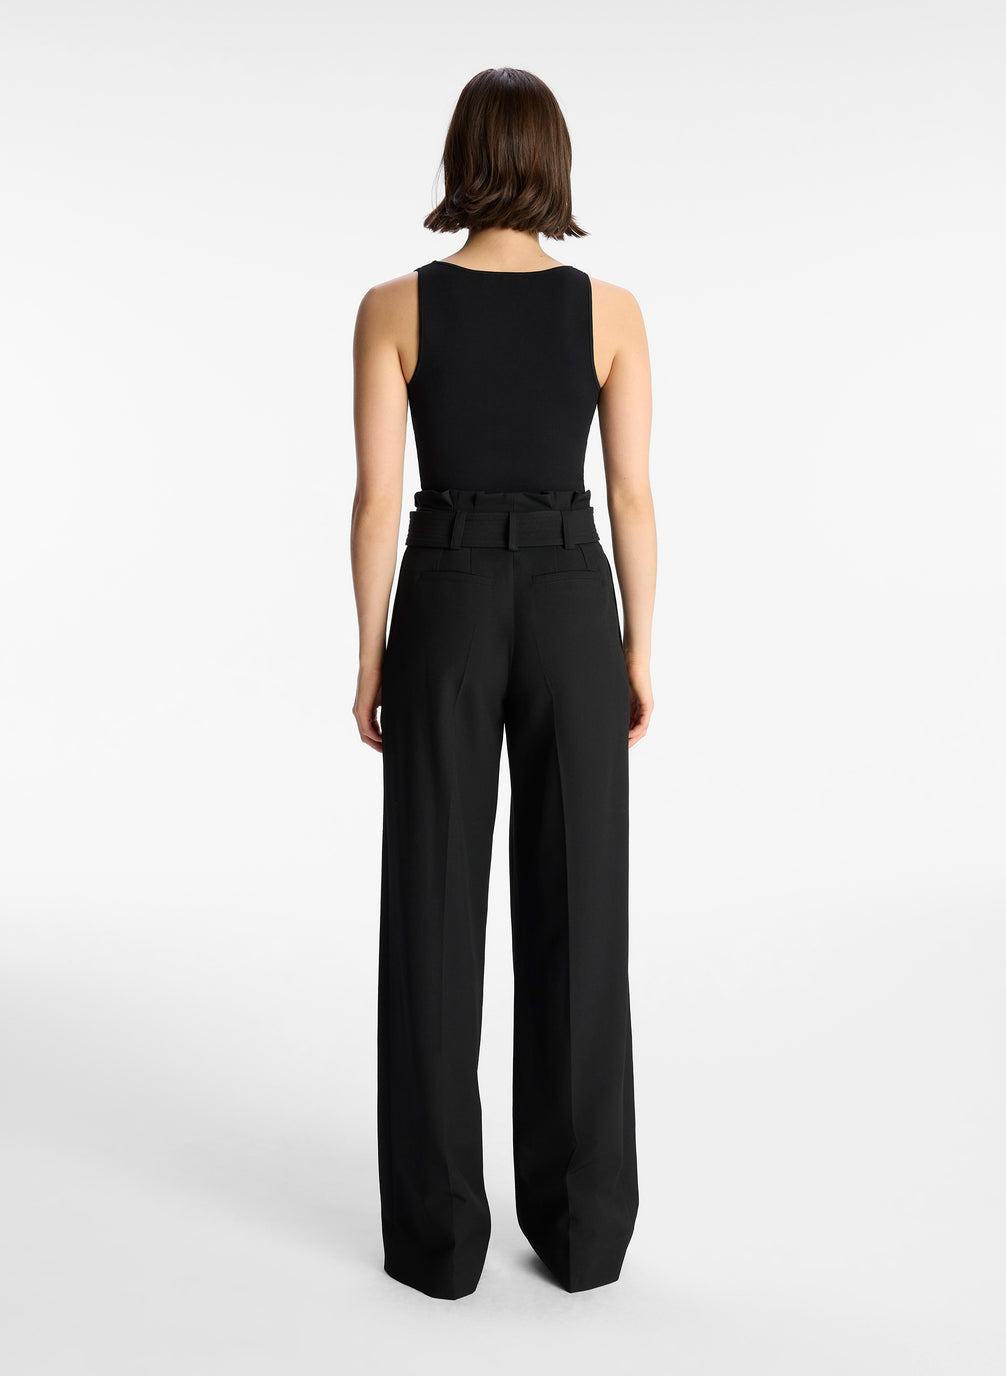 back view of woman wearing black tank top and black wide leg pants